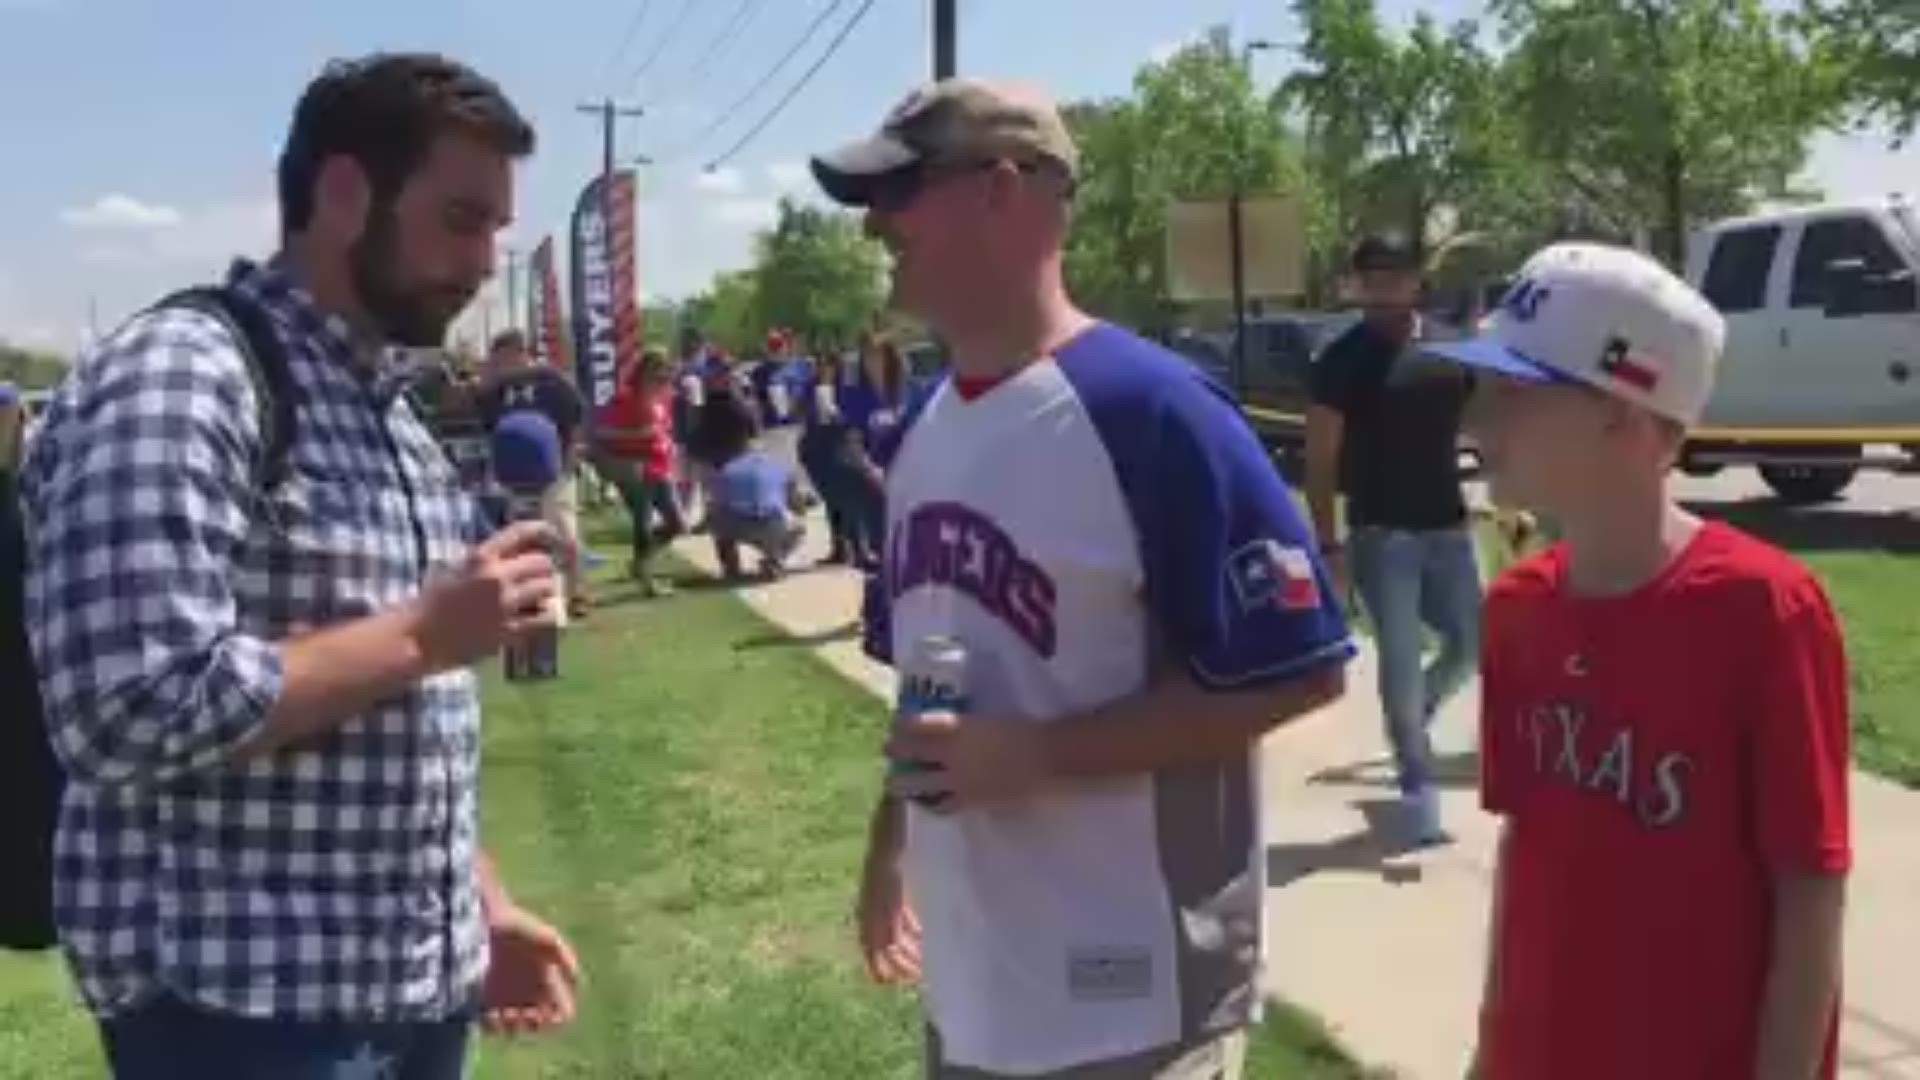 Landon Haaf scoured the crowd outside Globe Life Park at Opening Day. WFAA.com